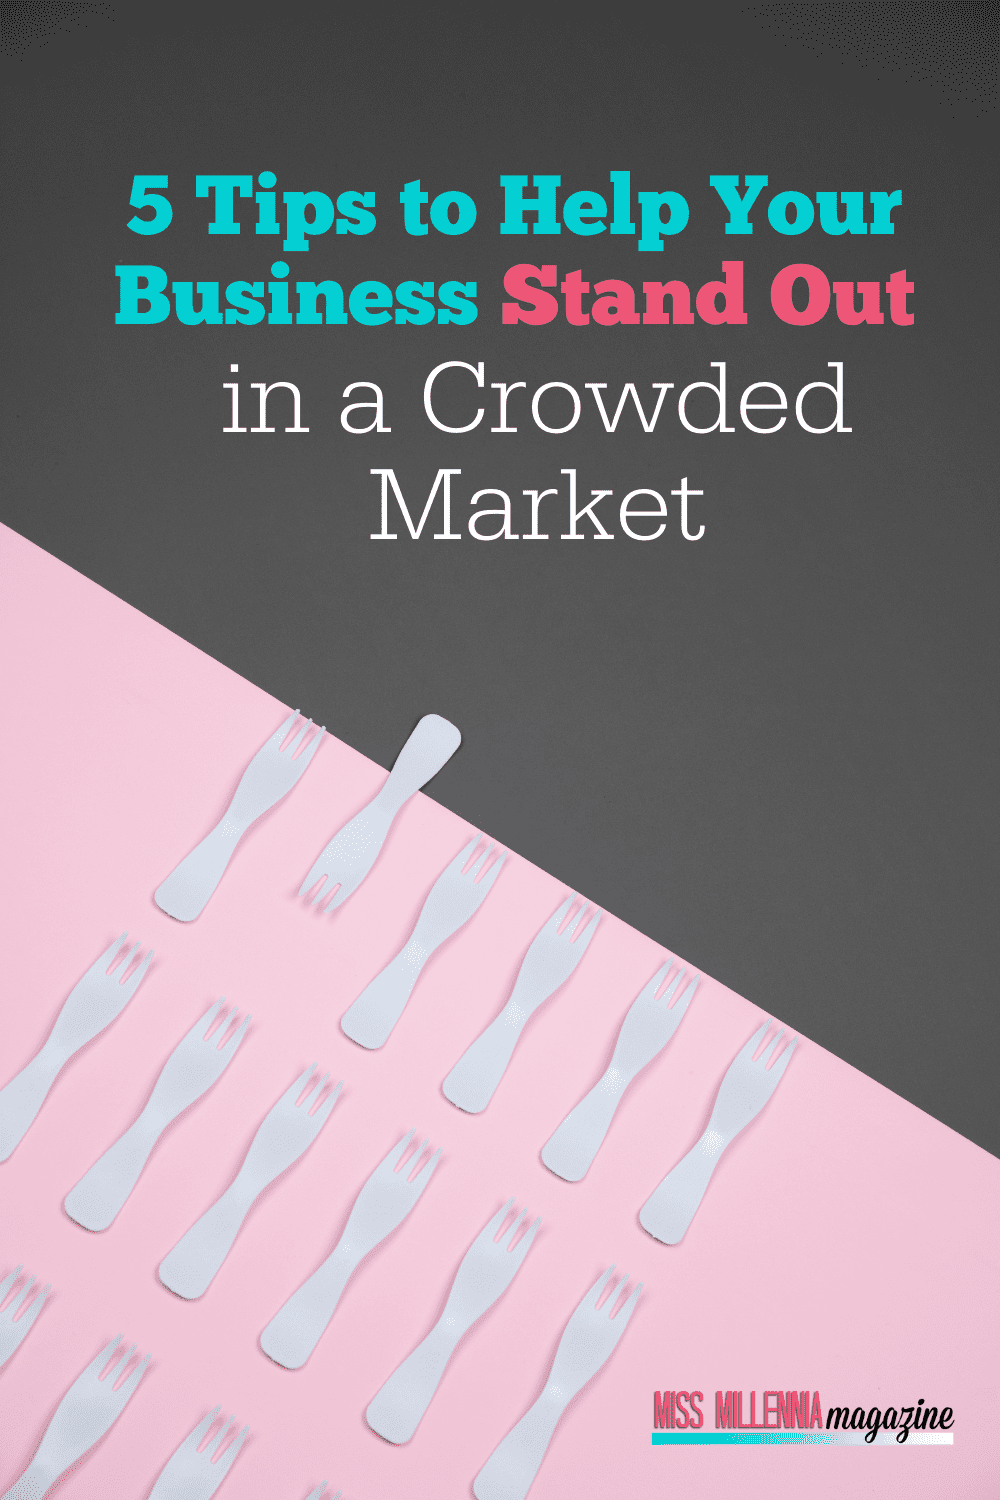 5 Tips to Help Your Business Stand Out in a Crowded Market